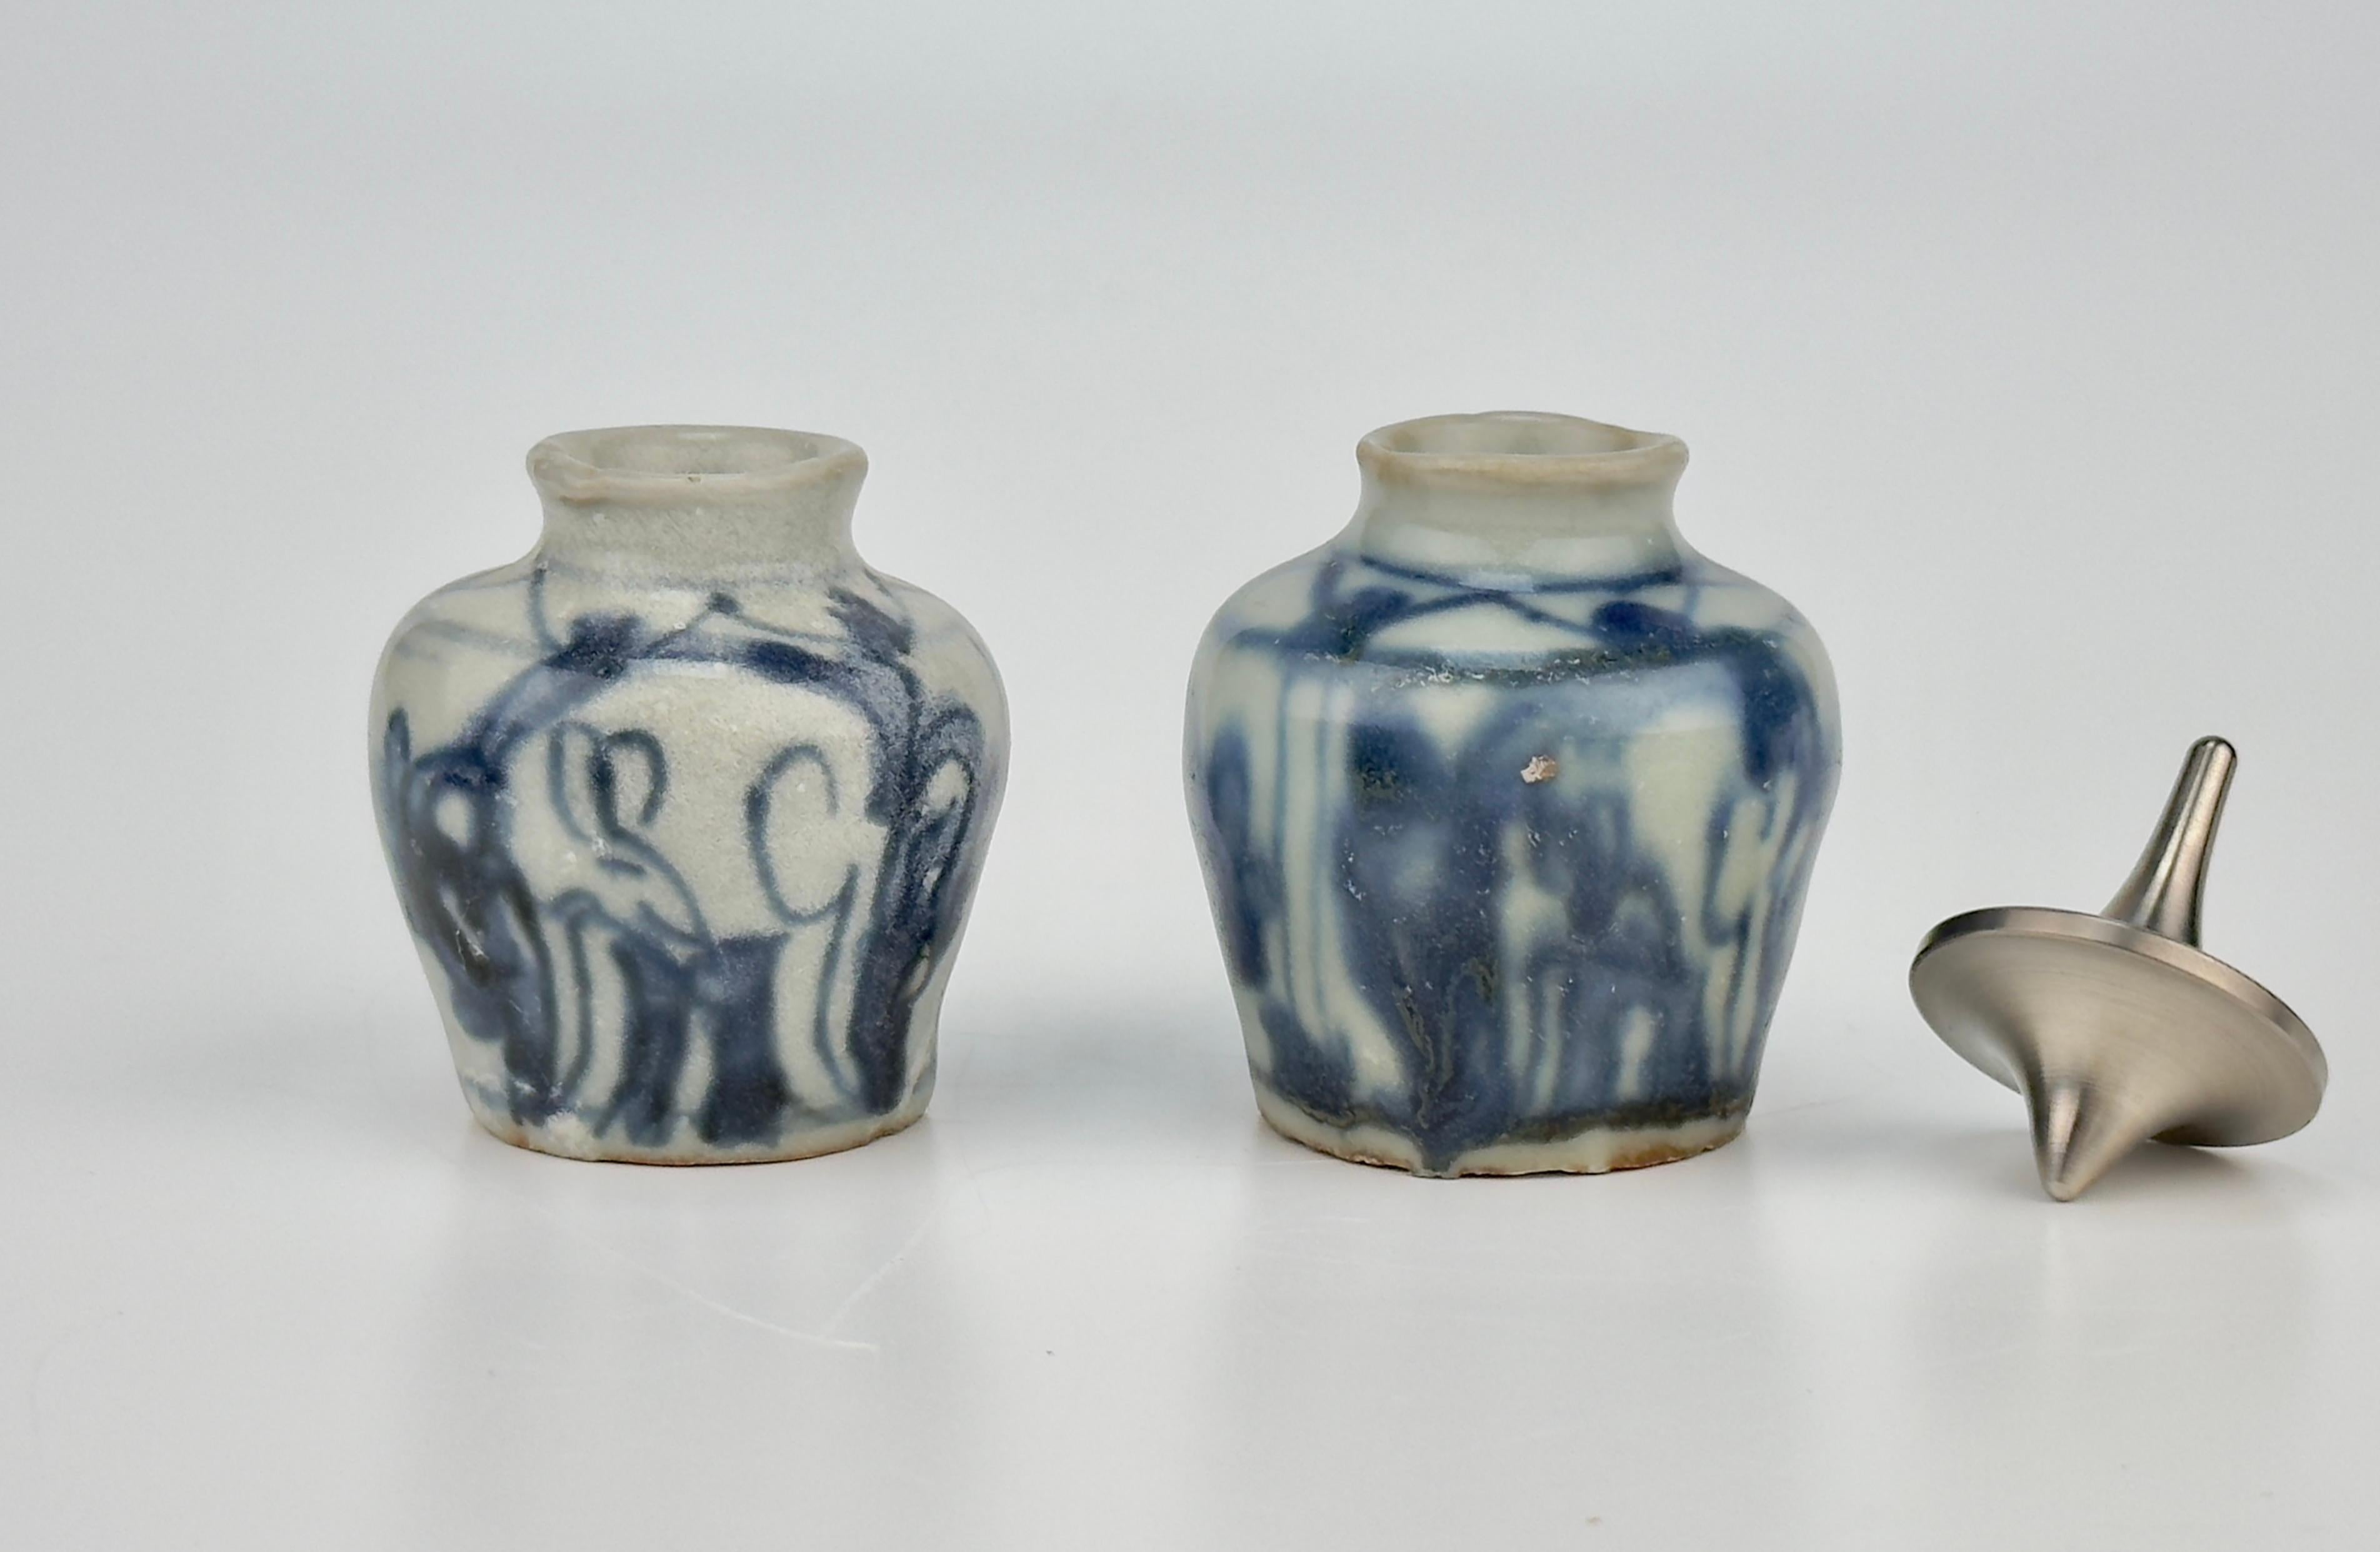 Pair of Small Jarlet with arabesque design, Late Ming Era(16-17th century) For Sale 4